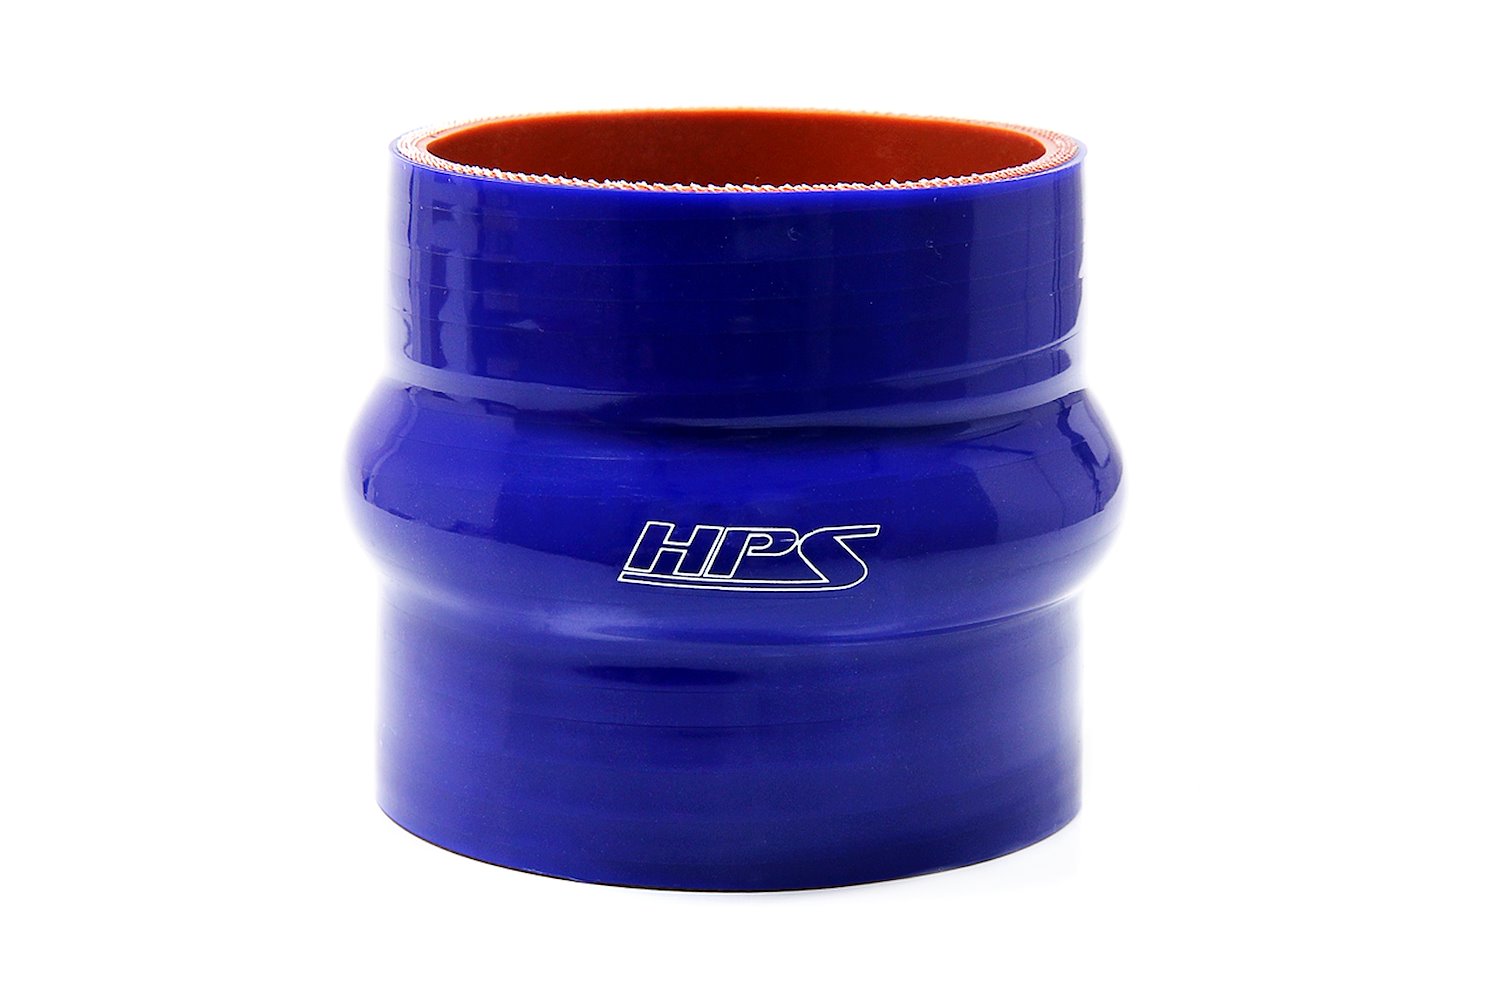 HTSHC-1000-L6-BLUE Silicone Hump Coupler Hose, High-Temp 6-Ply Reinforced, 10 in. ID, 6 in. Long, Blue